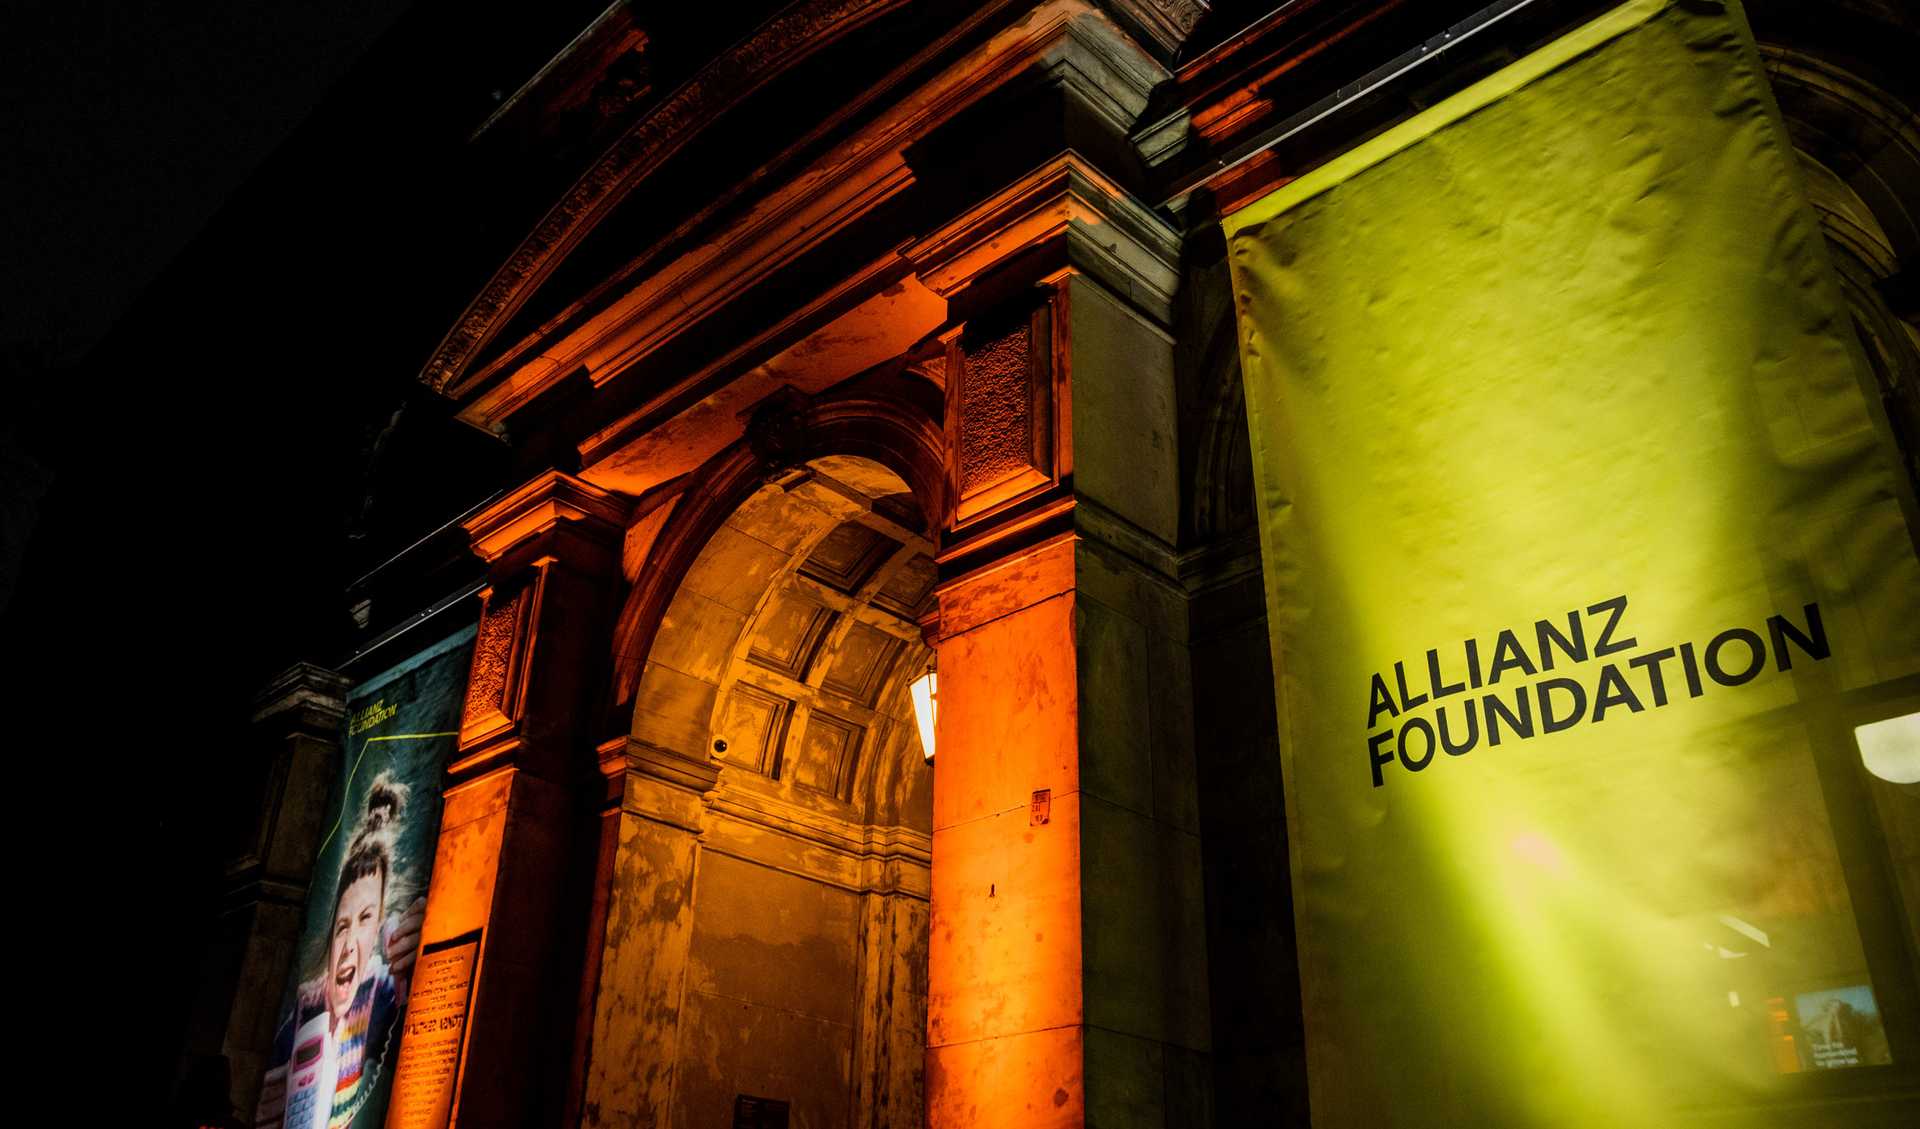  Museum of Natural History from the outside with a yellow Allianz Foundation banner